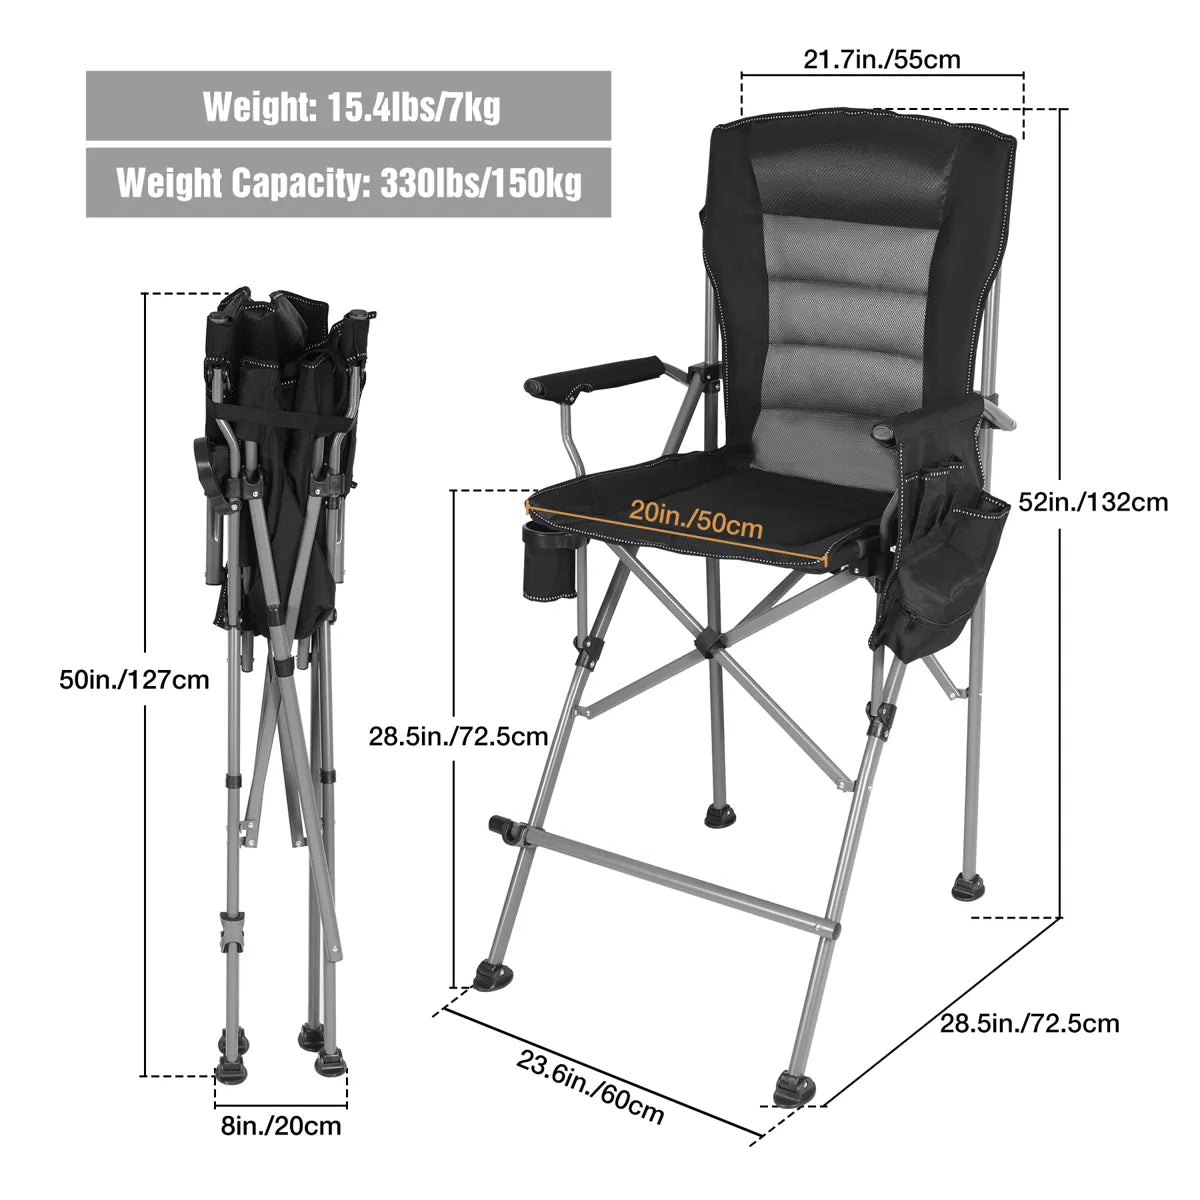 Bar Height Extra Tall Folding Chairs with High Back Padded Seat and Arms